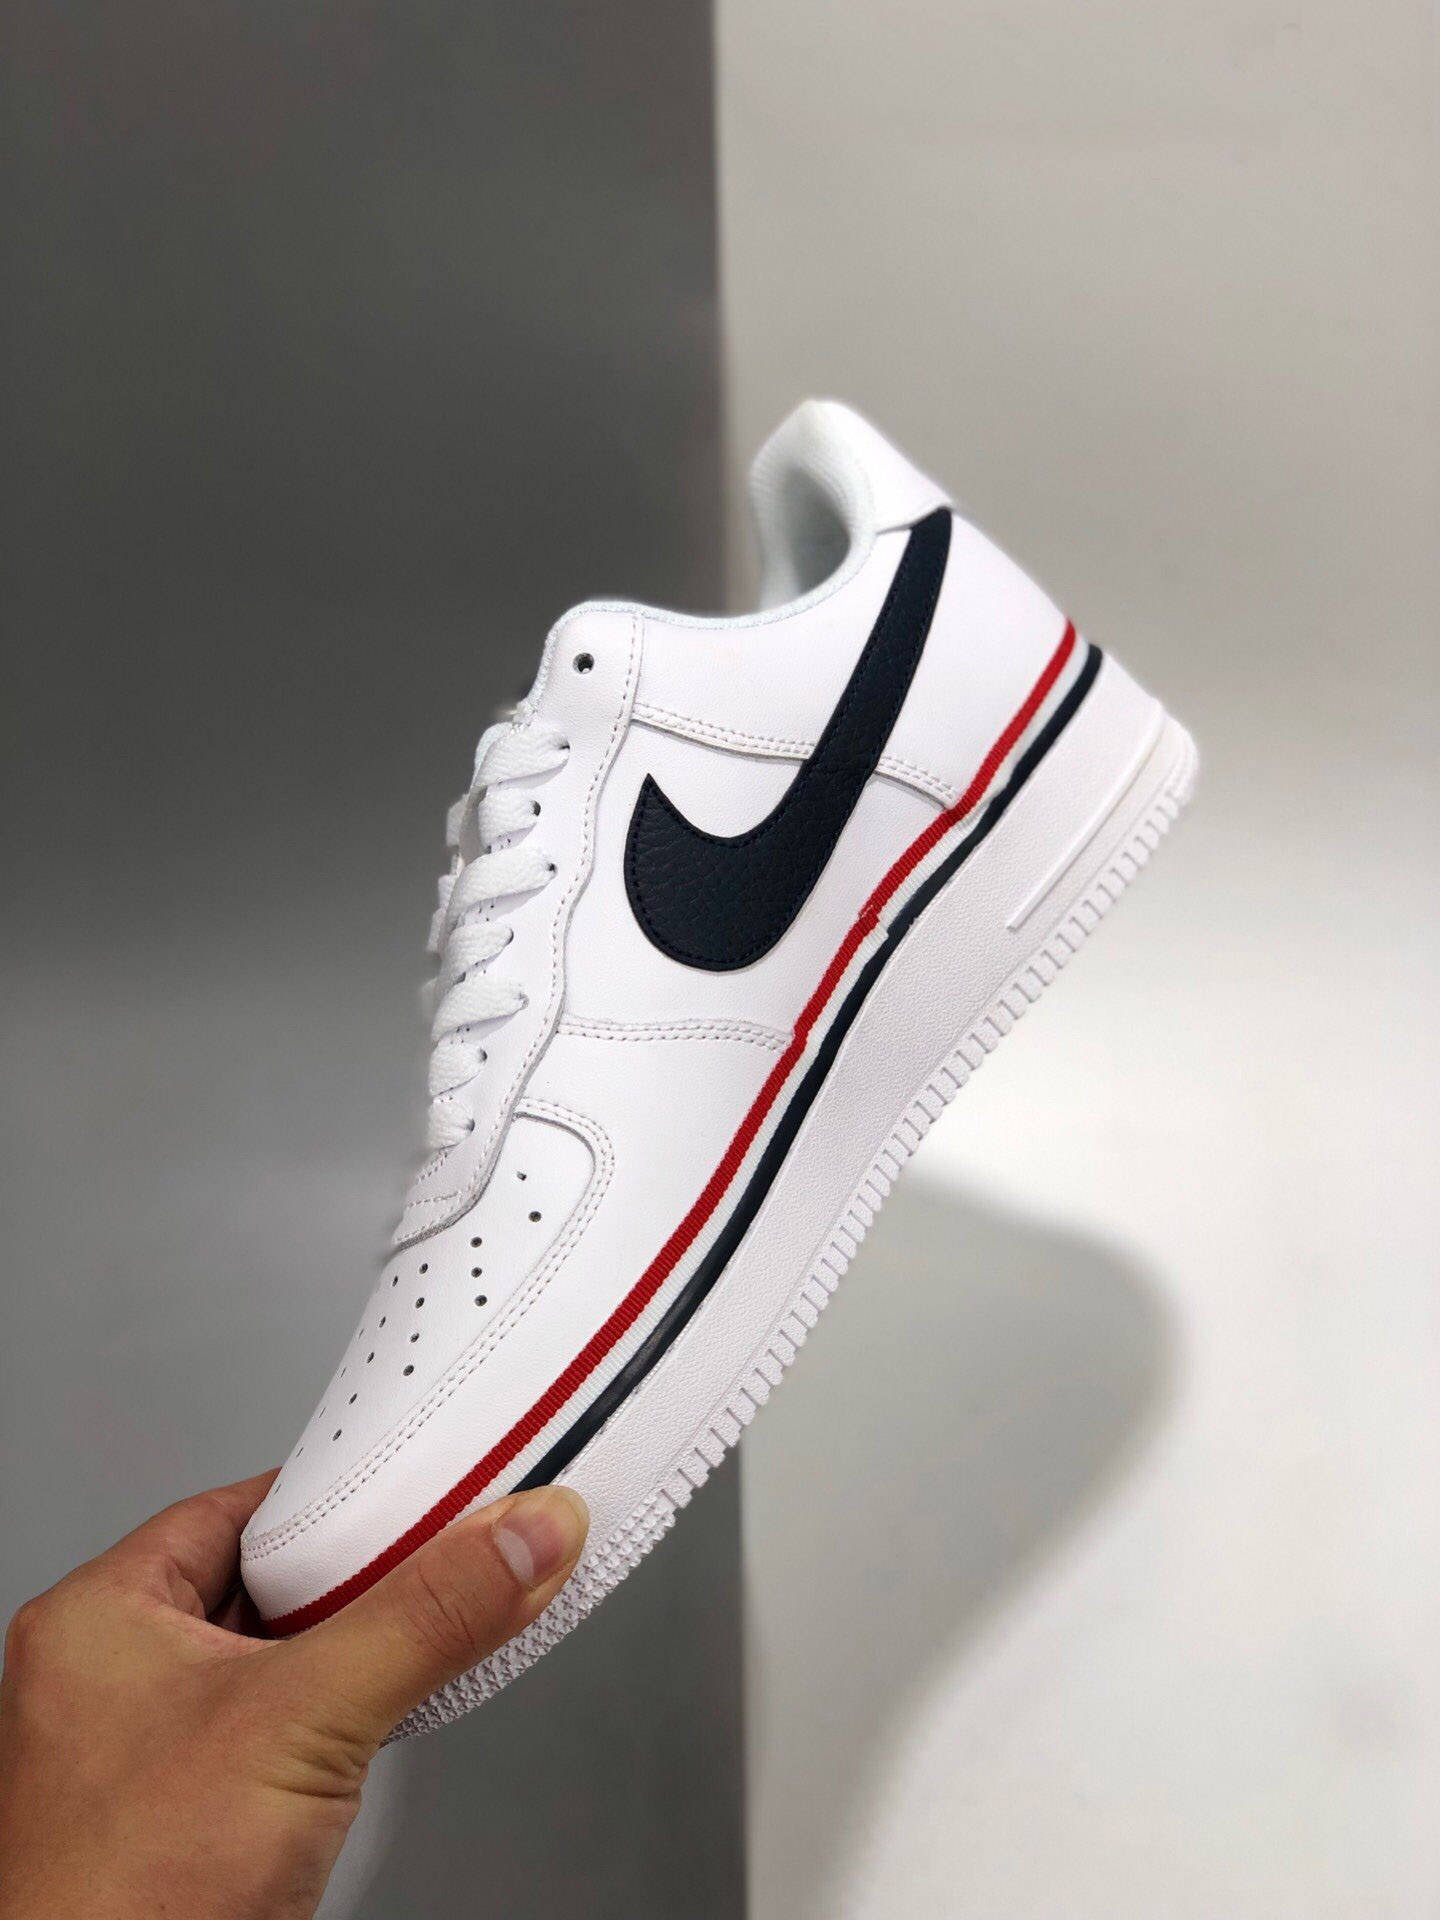 Nike Air Force 1 Low ‘Ribbon’ White Black CT1621-100 For Sale – Sneaker ...